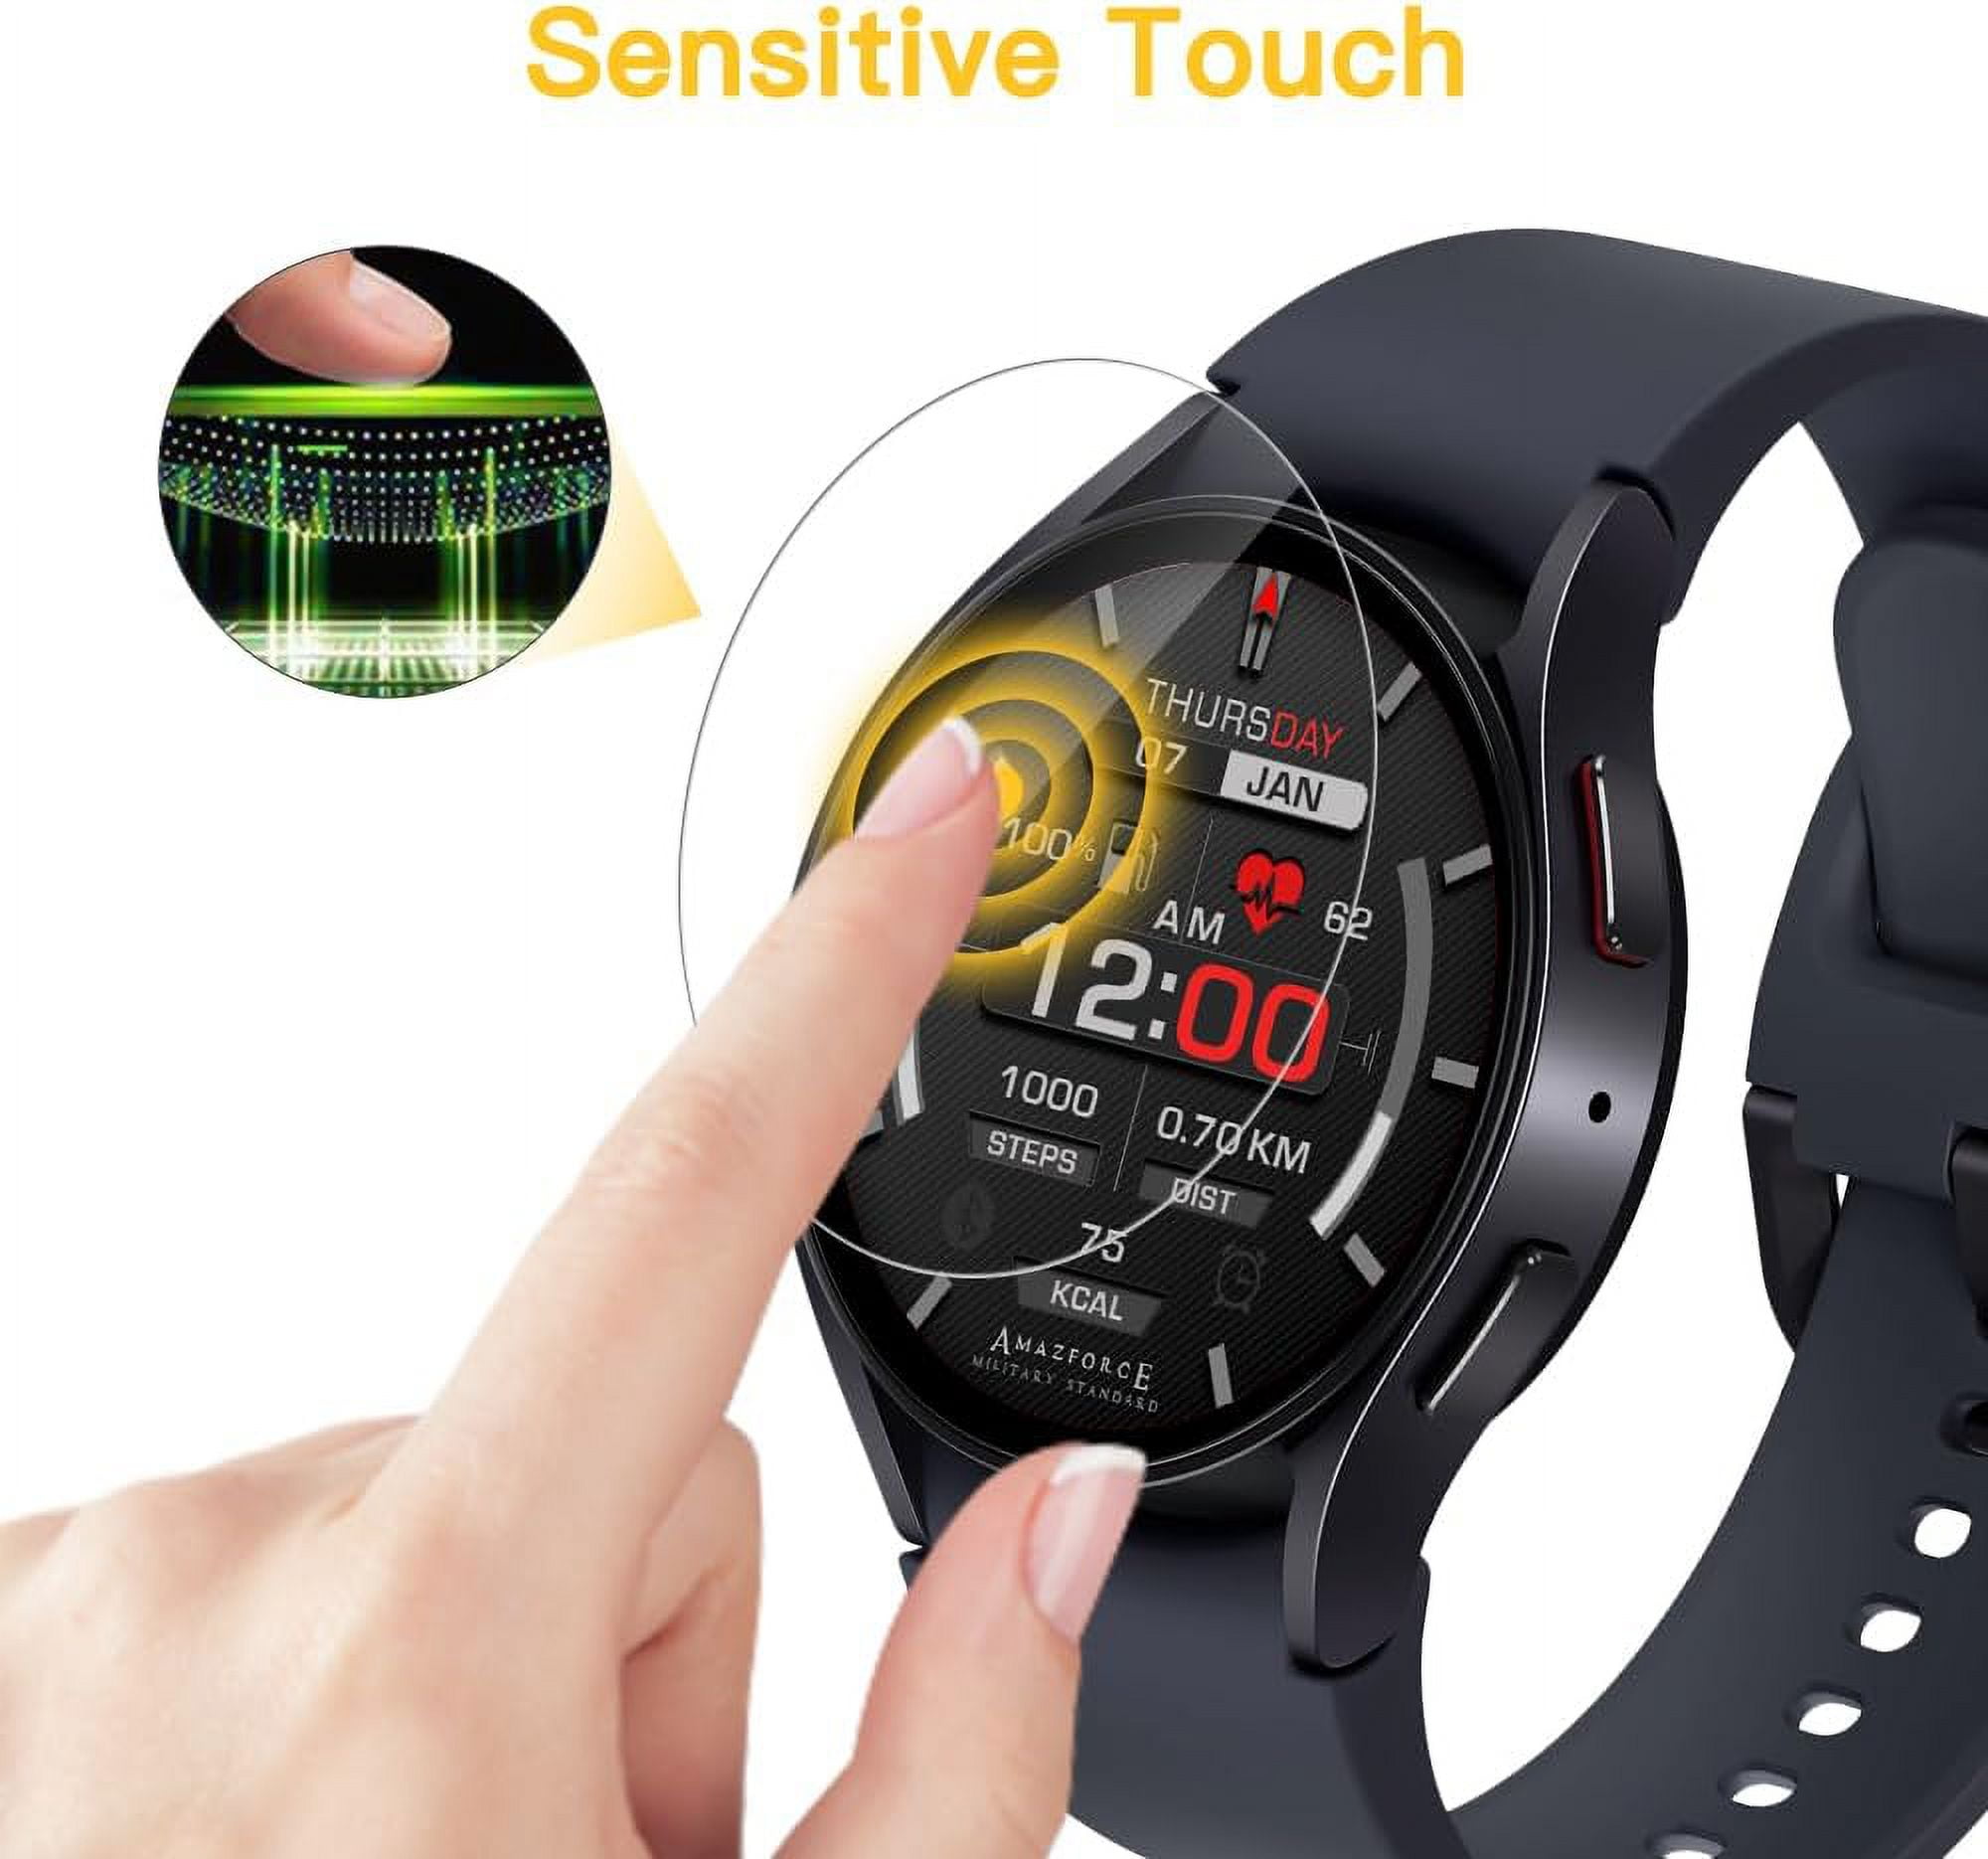 4pcs Hd Tempered Glass Screen Protector For Samsung Galaxy Watch 6 40mm  44mm, Watch 6 Classic 43mm 47mm 9h Hardness Film